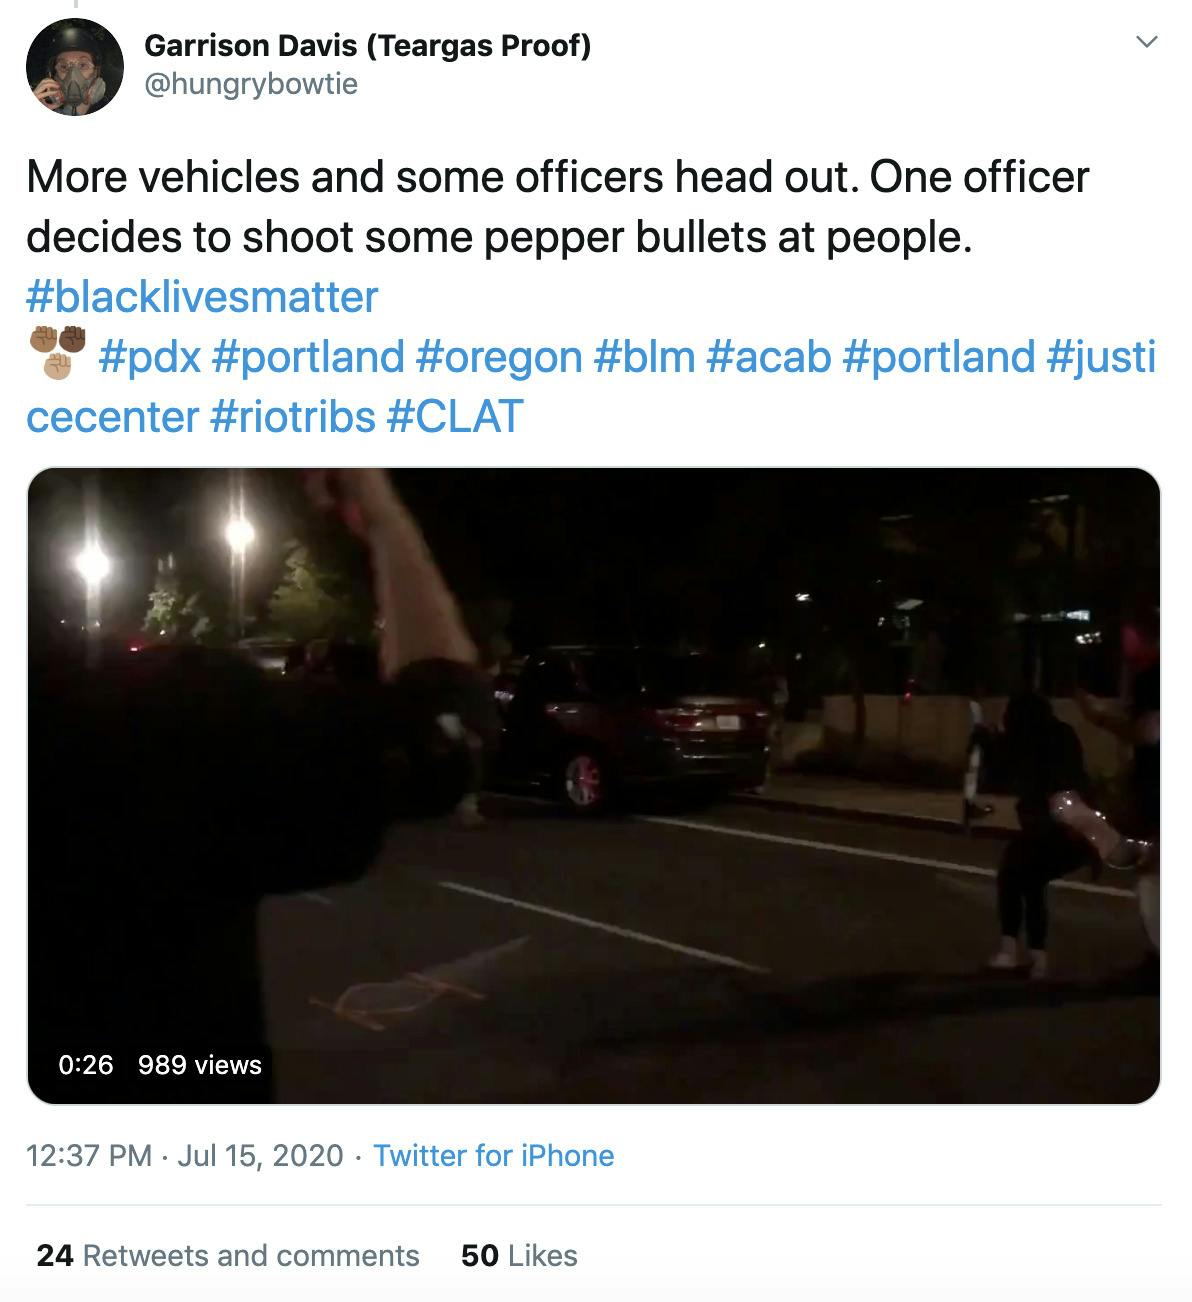 More vehicles and some officers head out. One officer decides to shoot some pepper bullets at people. #blacklivesmatter #pdx #portland #oregon #blm #acab #portland #justicecenter #riotribs #CLAT" video footage